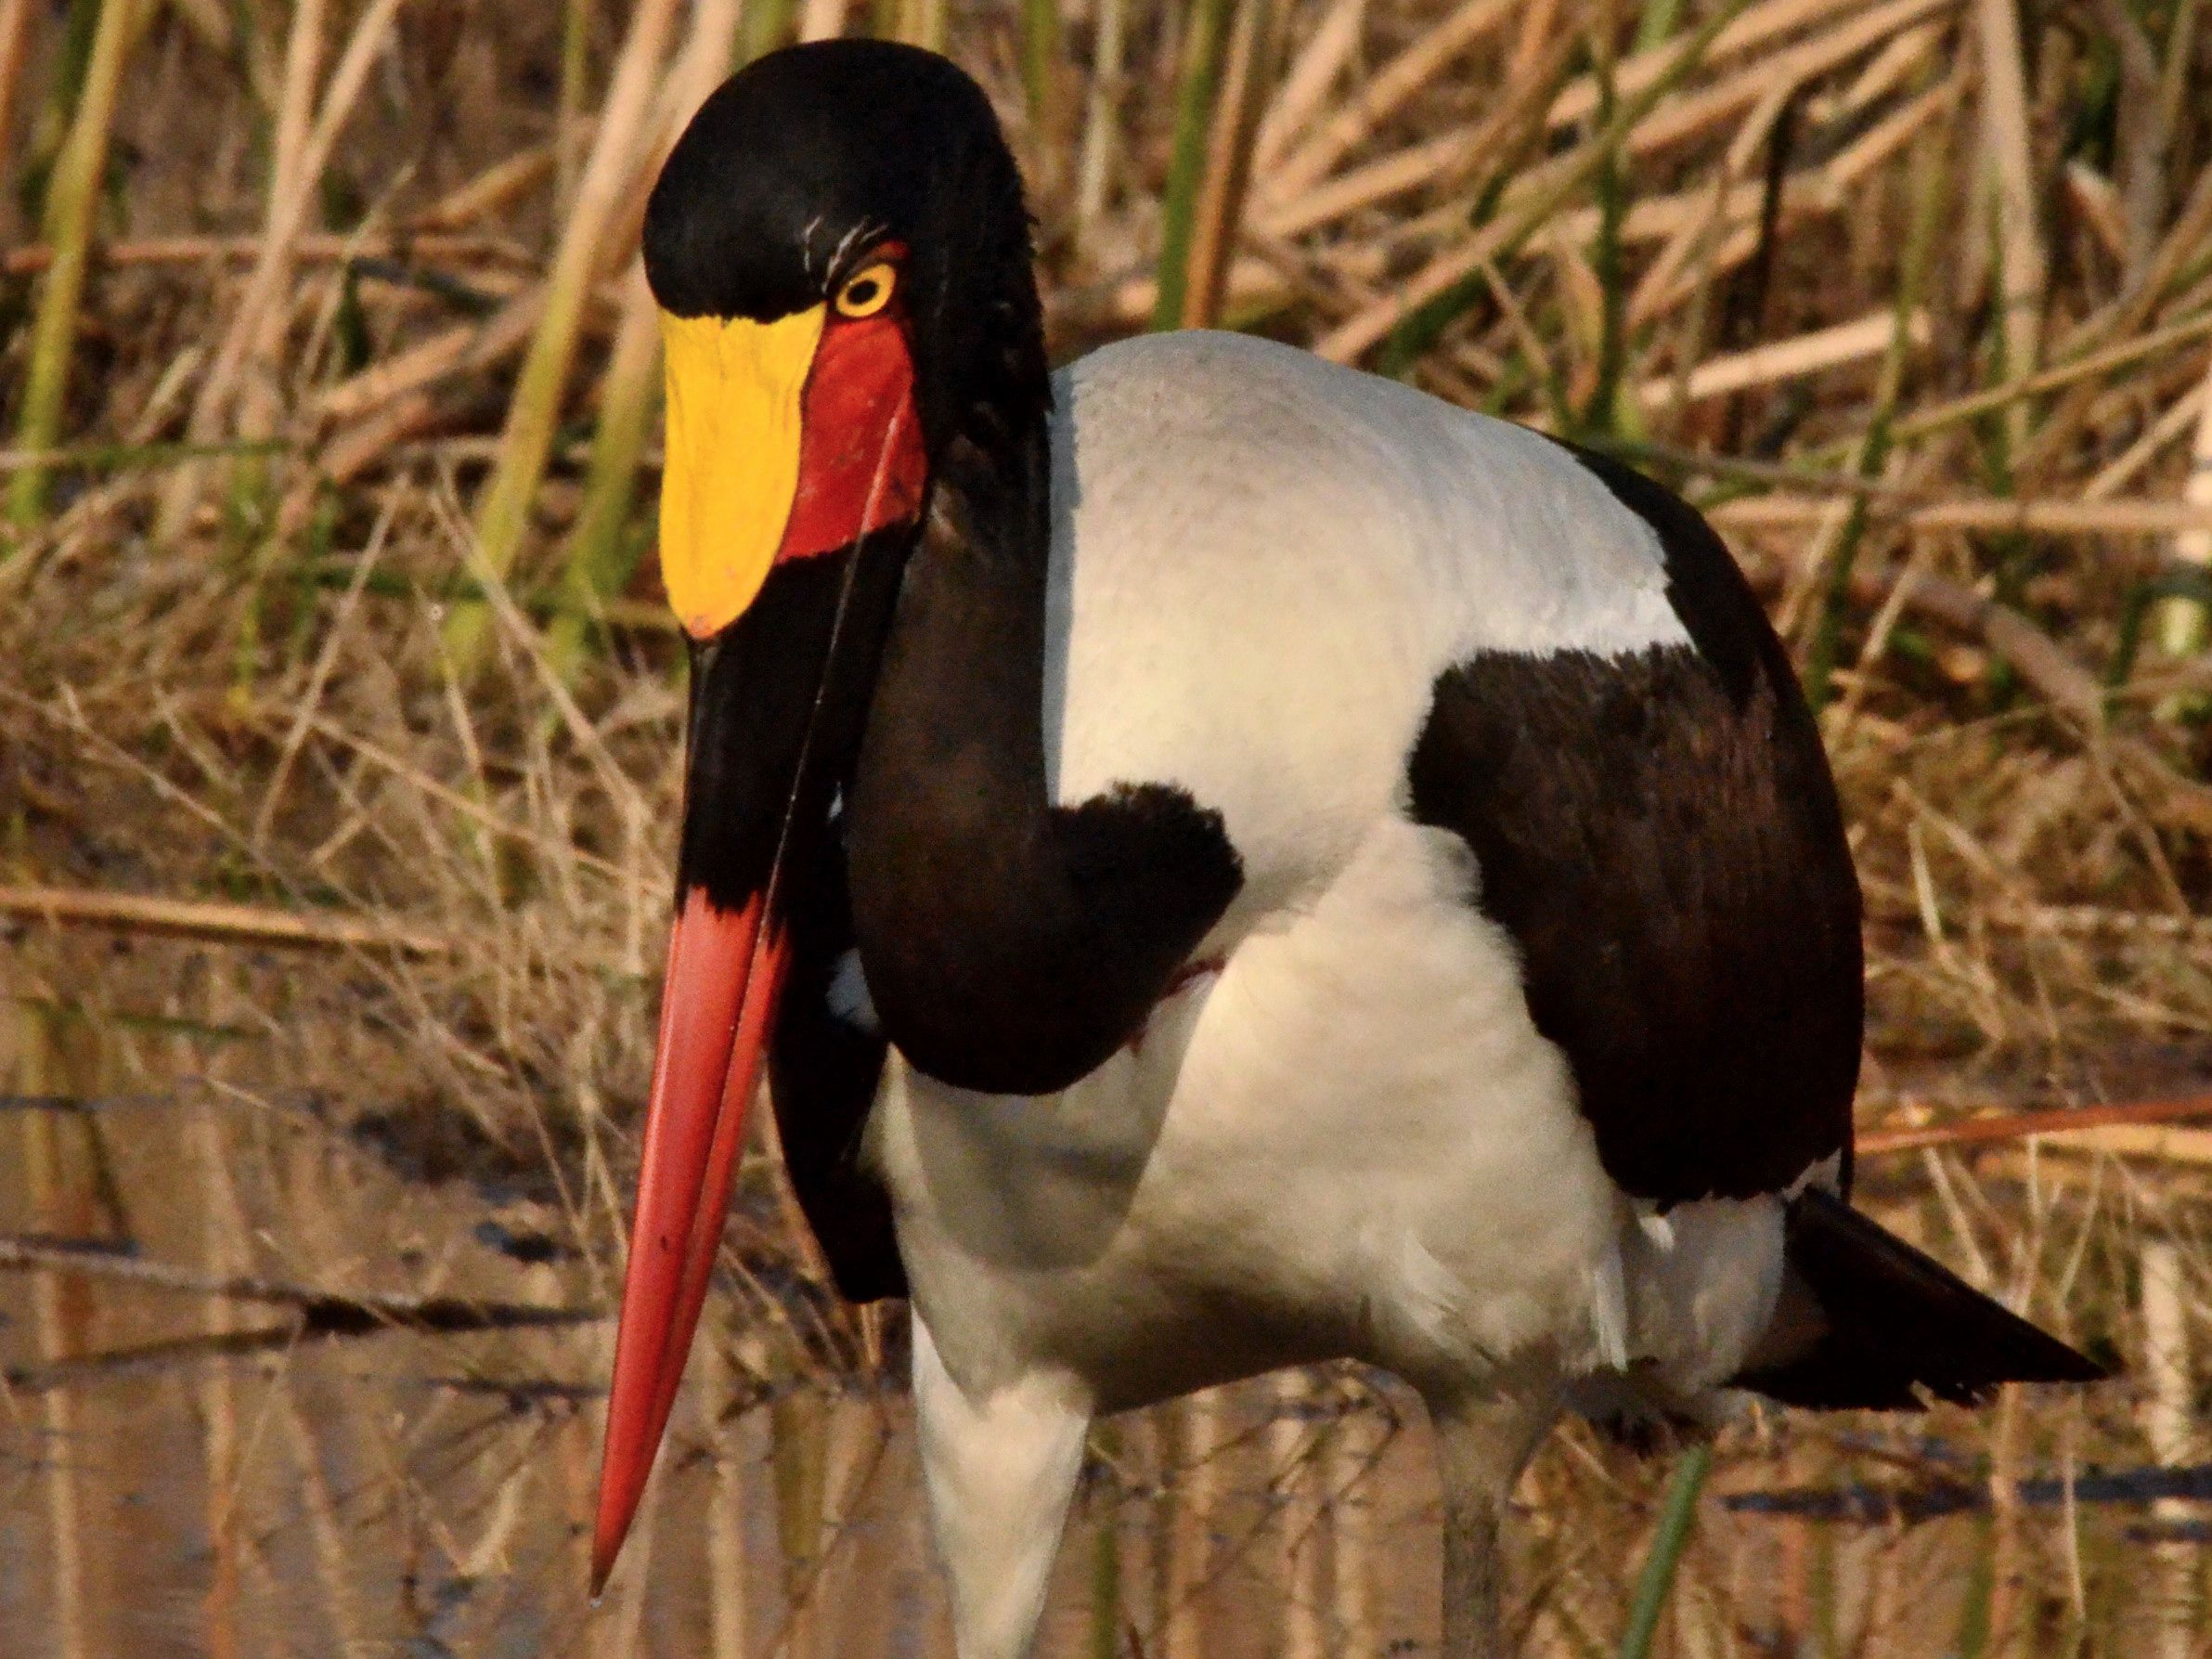 Click picture to see more Saddle-billed Storks.